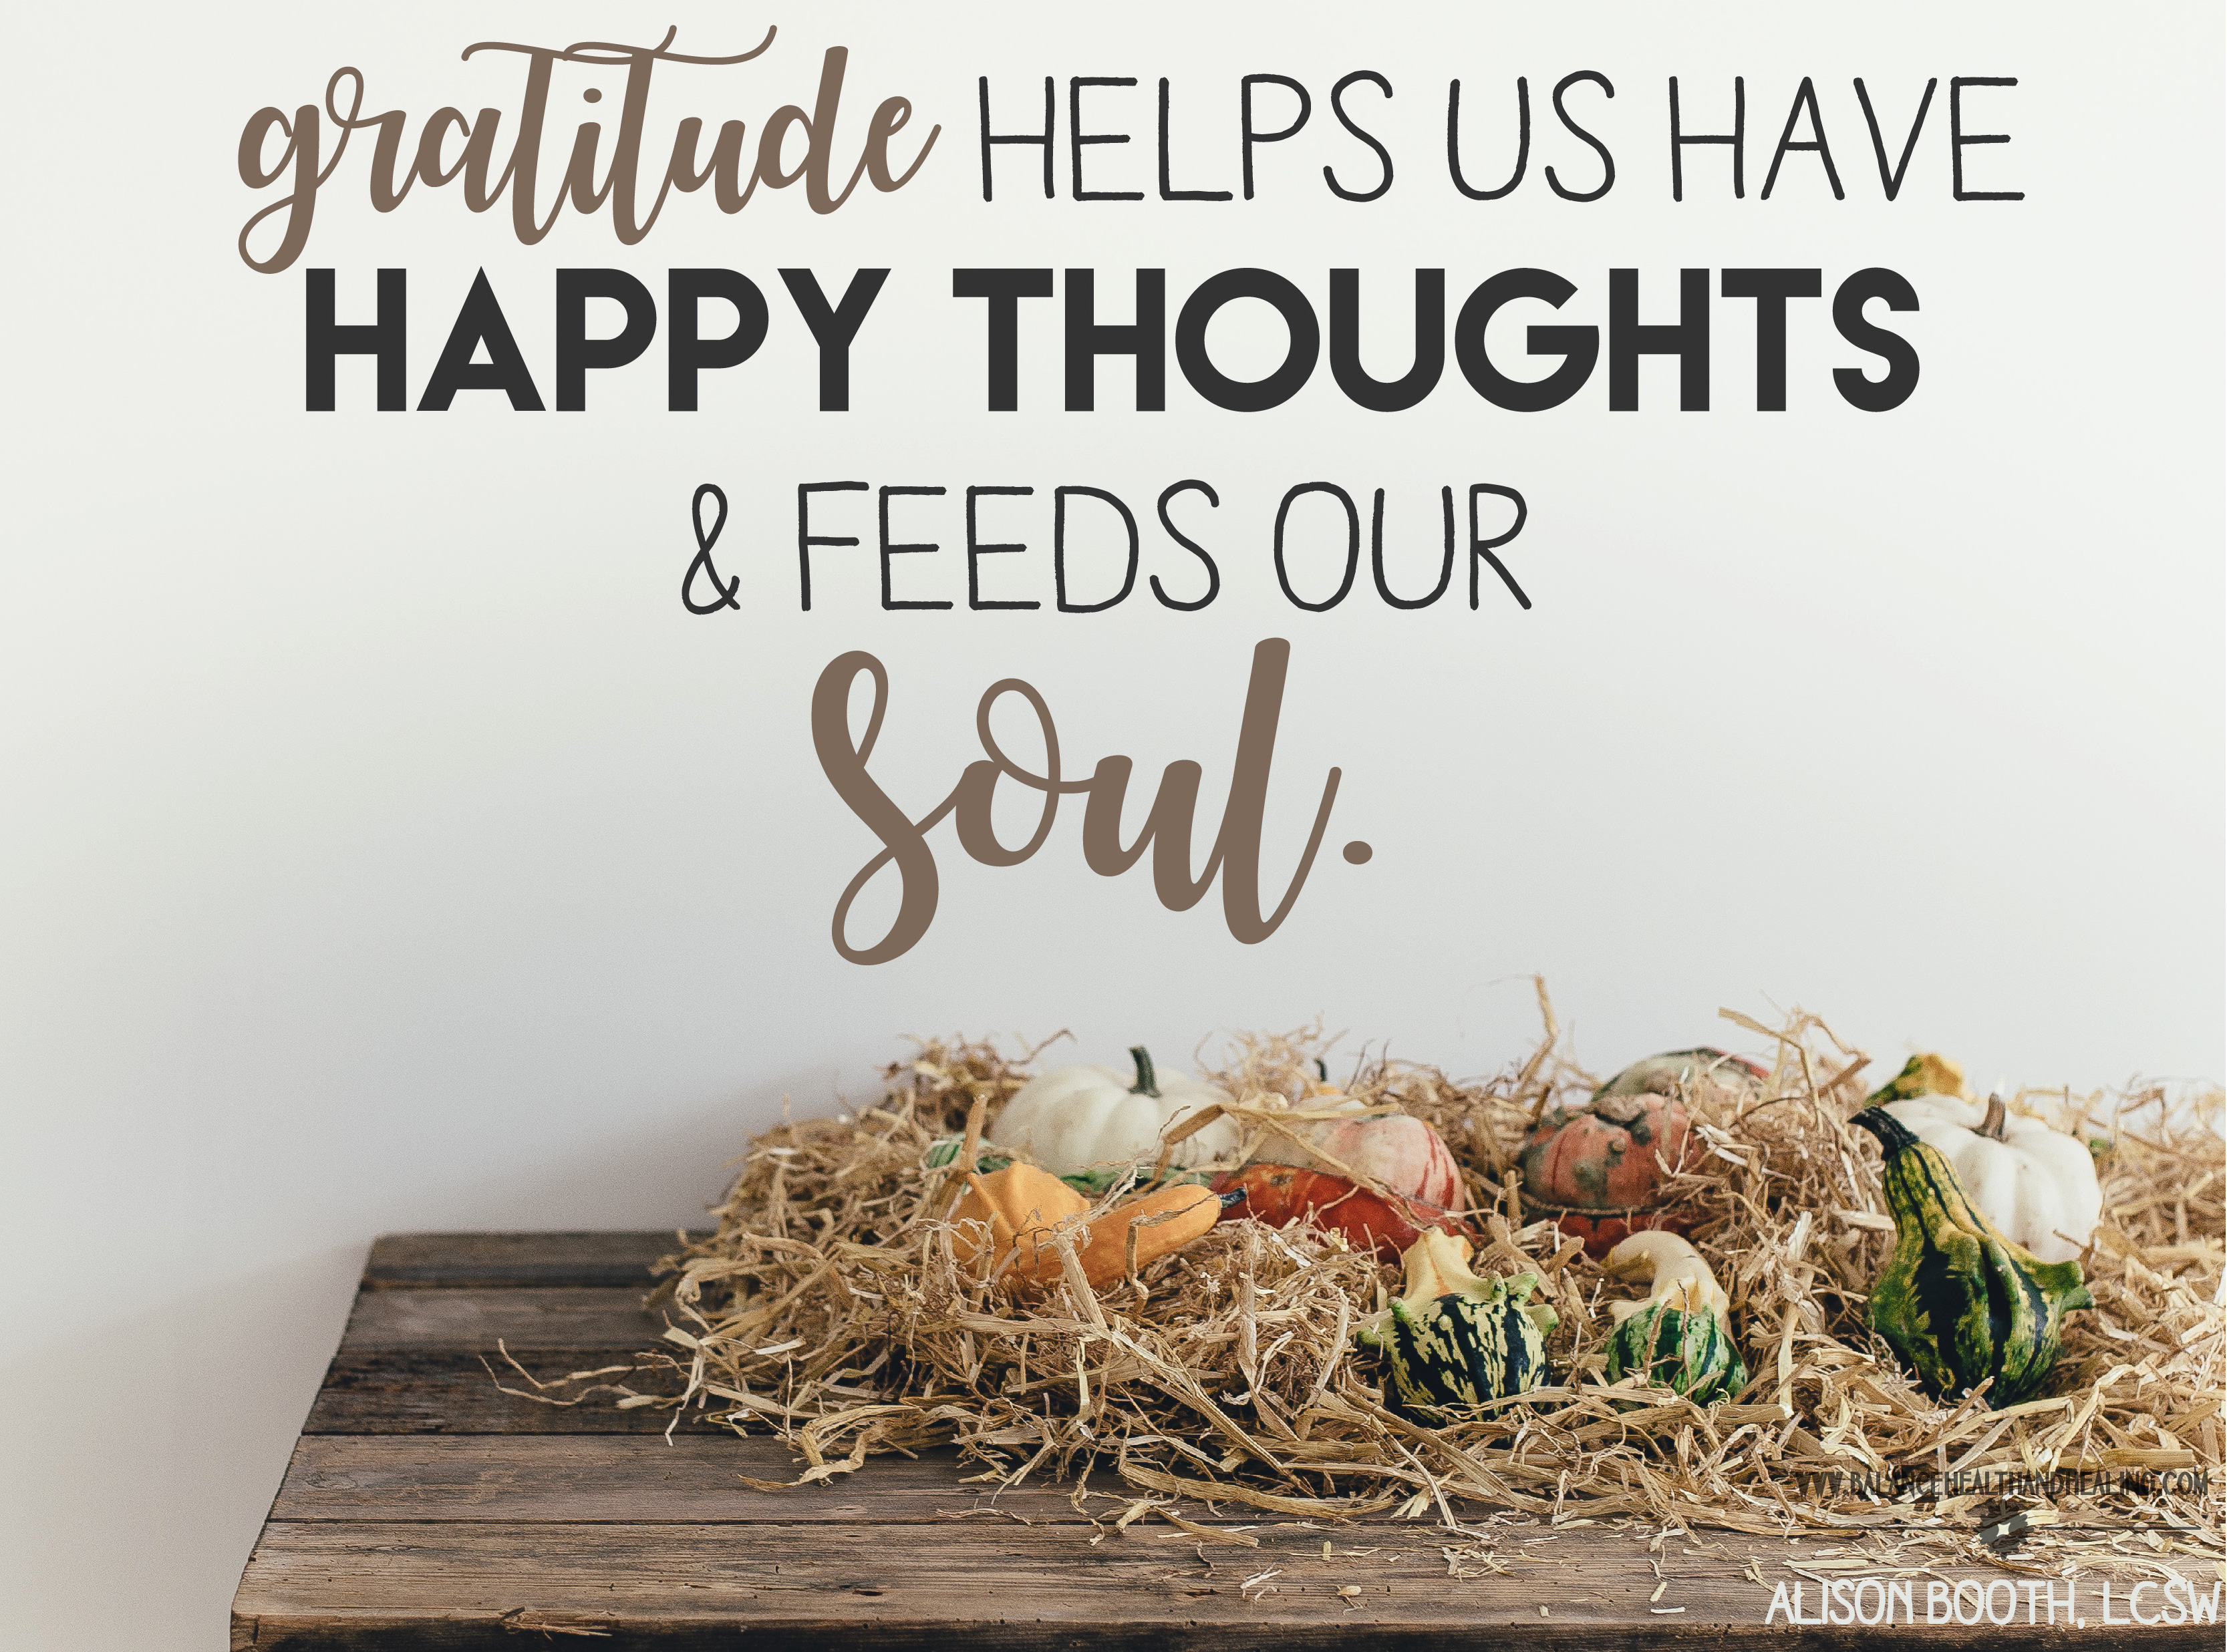 How to Gobble up Gratitude During the Holidays